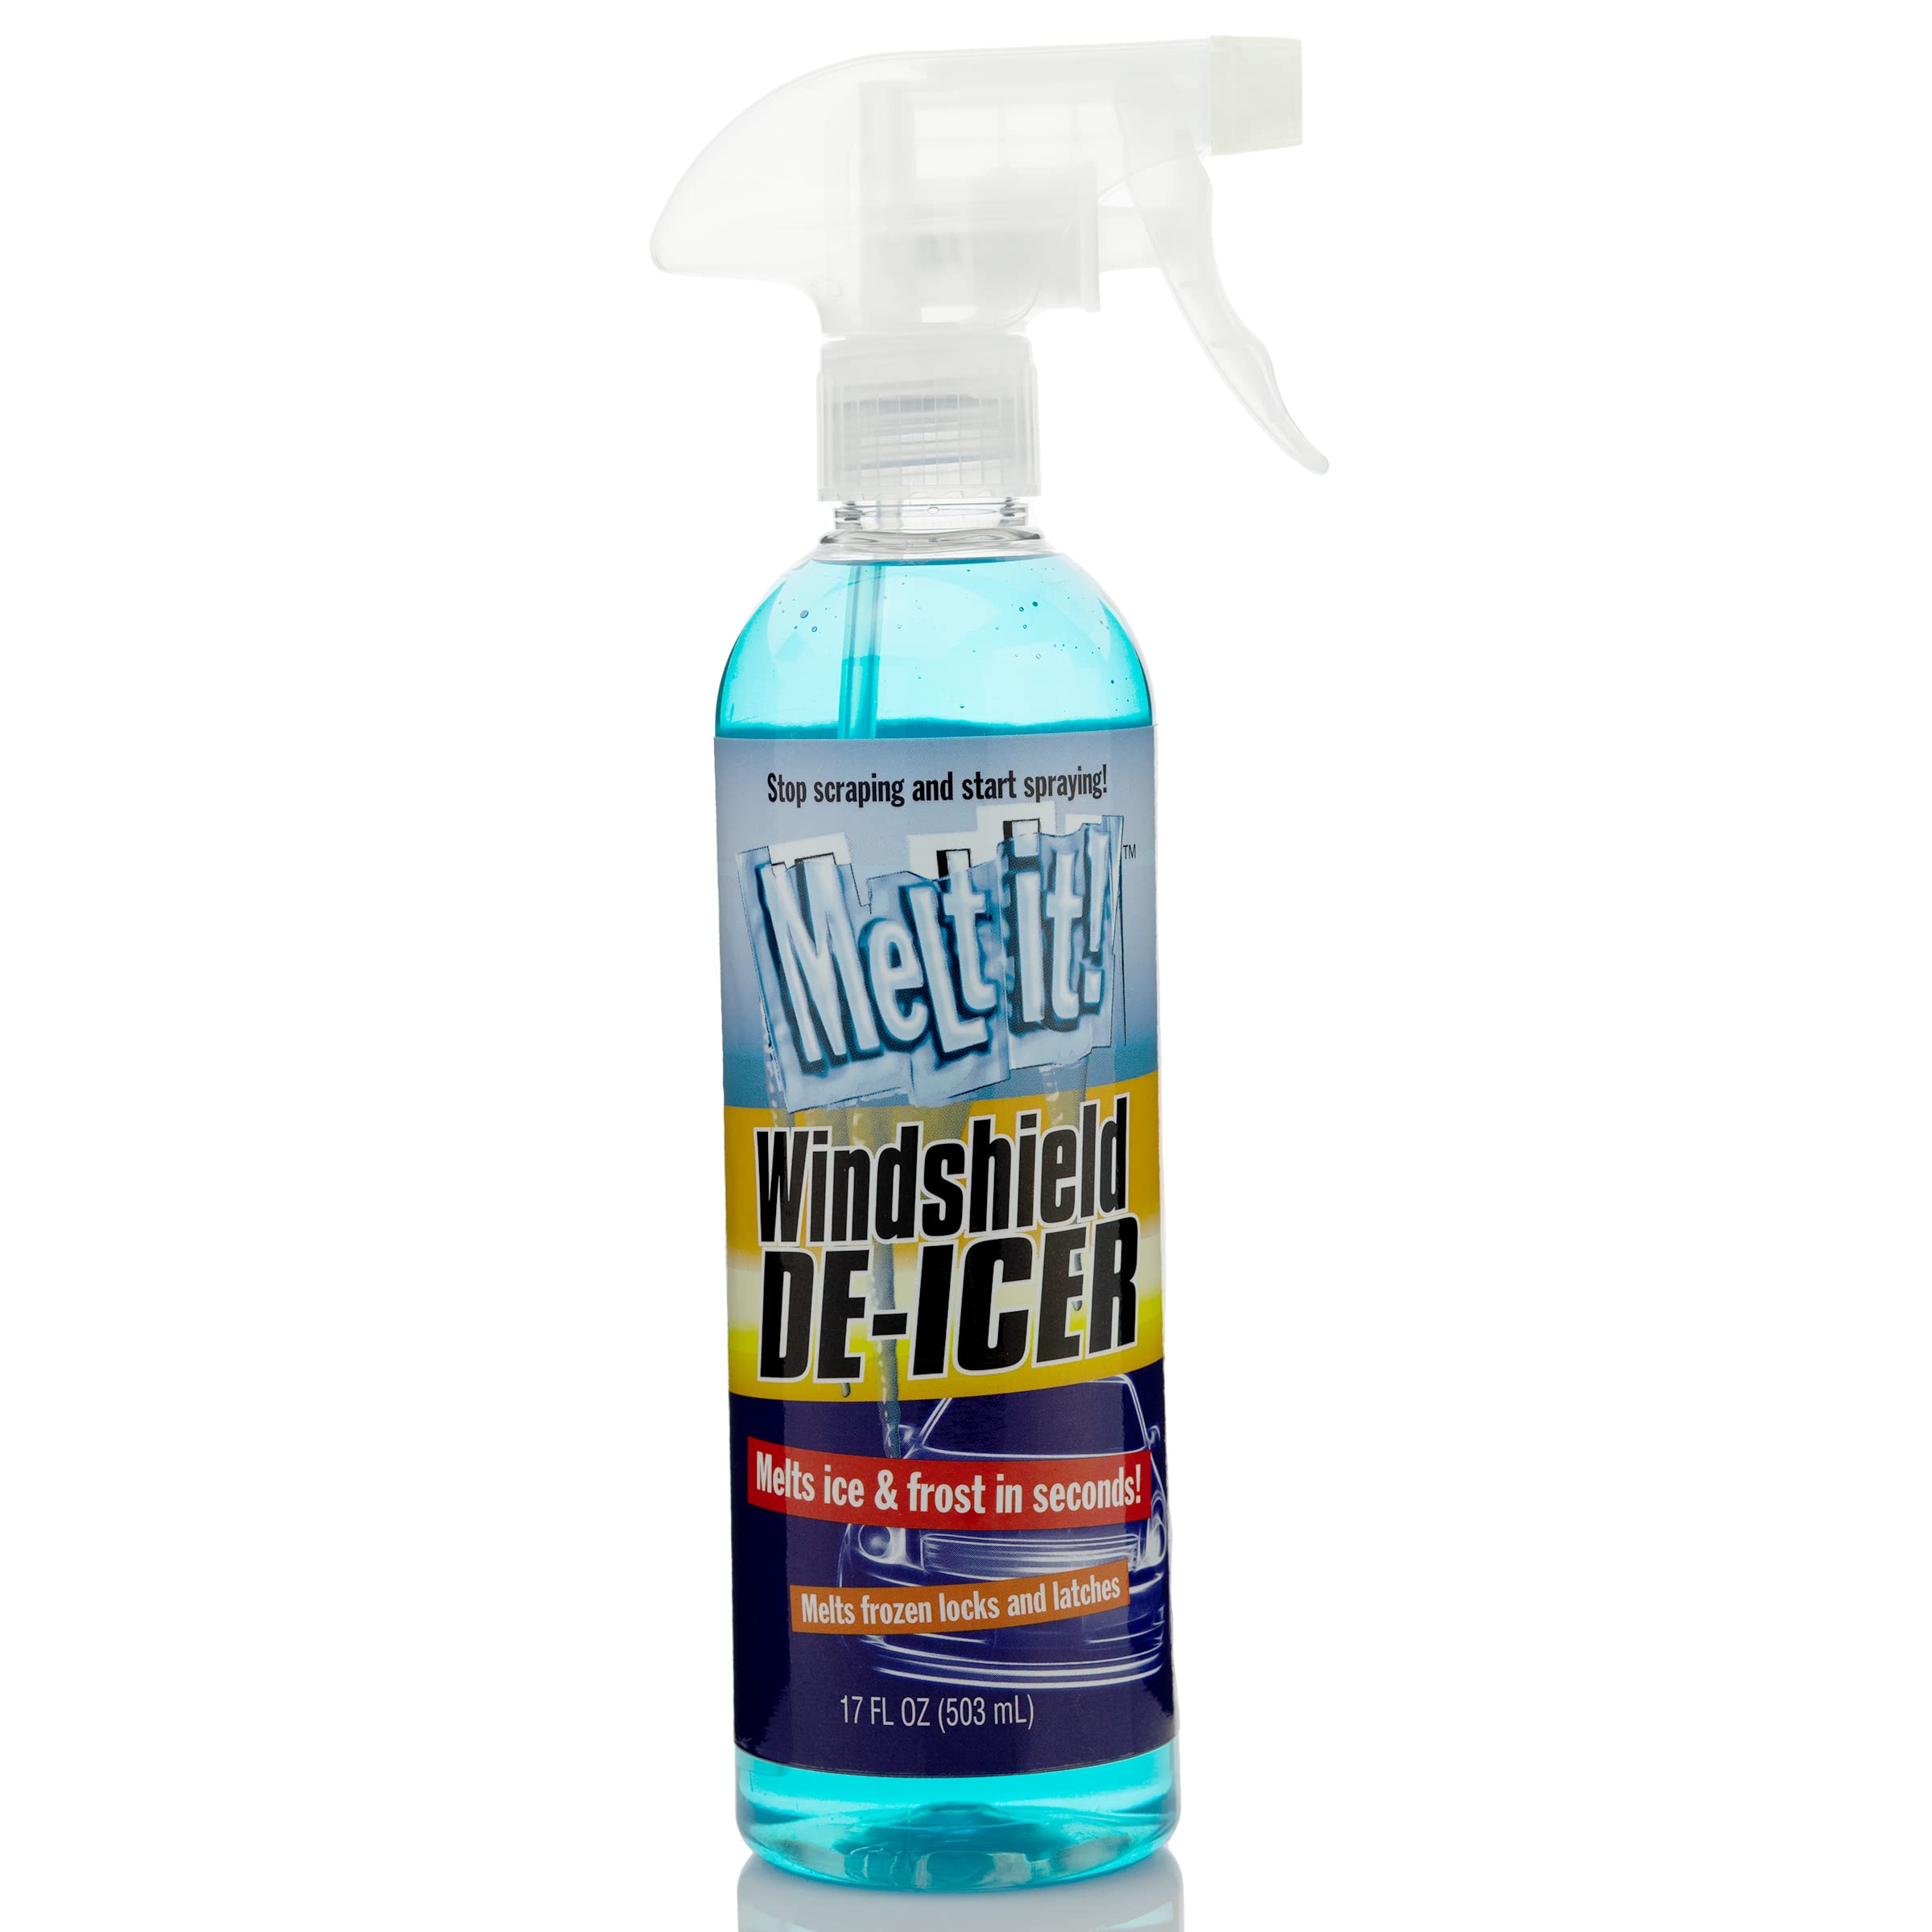 Auto Windshield Spray De-icer Spray Quickly And Easily Melts Ice